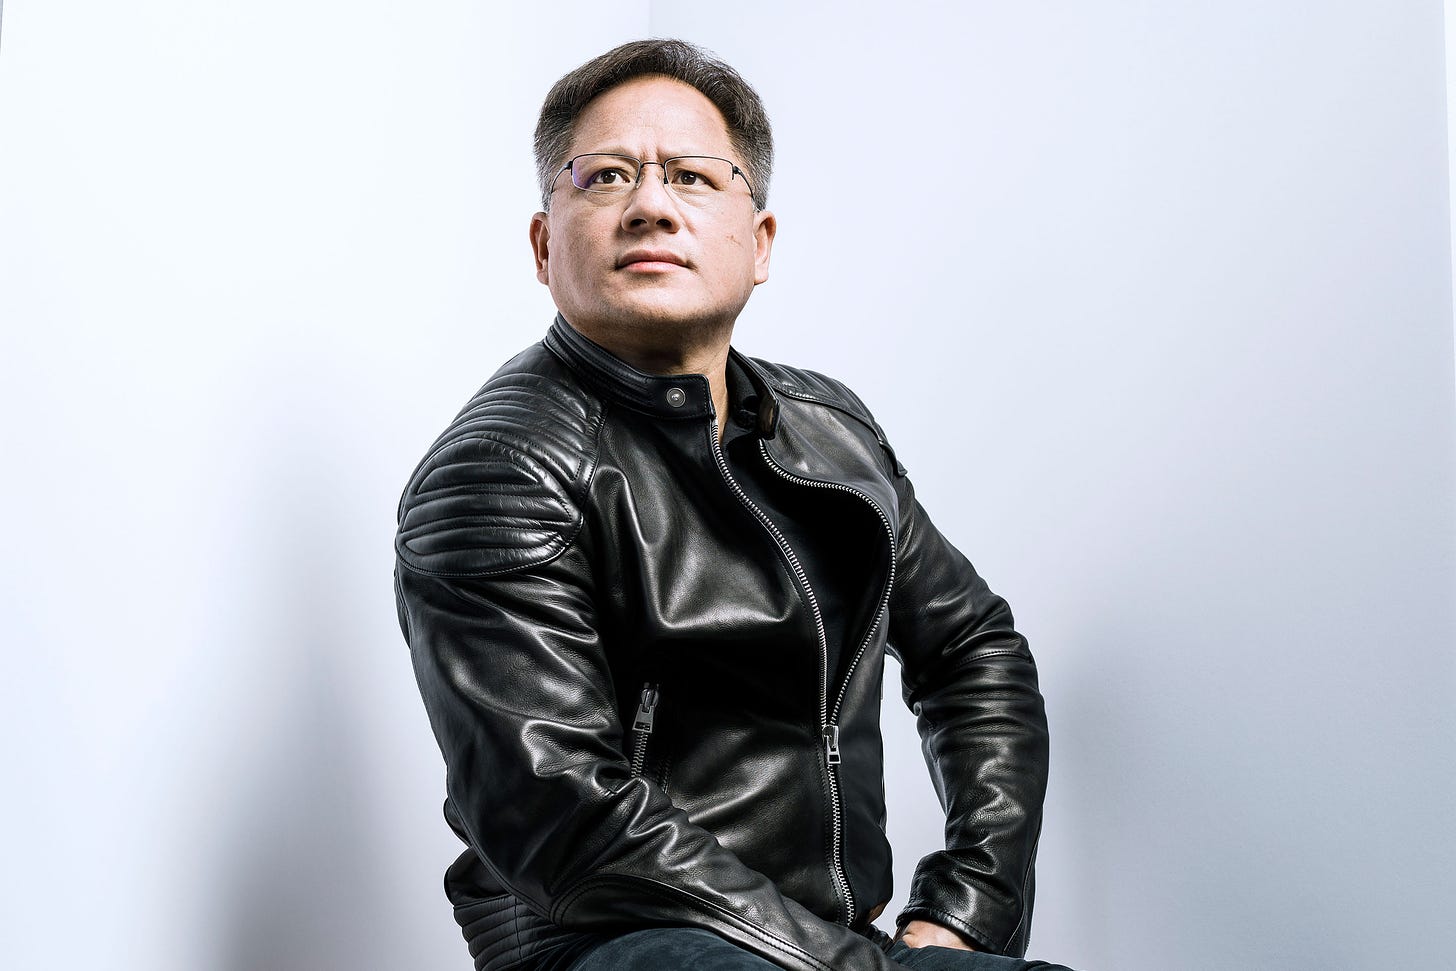 Nvidia CEO Jensen Huang Is Fortune's 2017 Businessperson of the Year |  Fortune